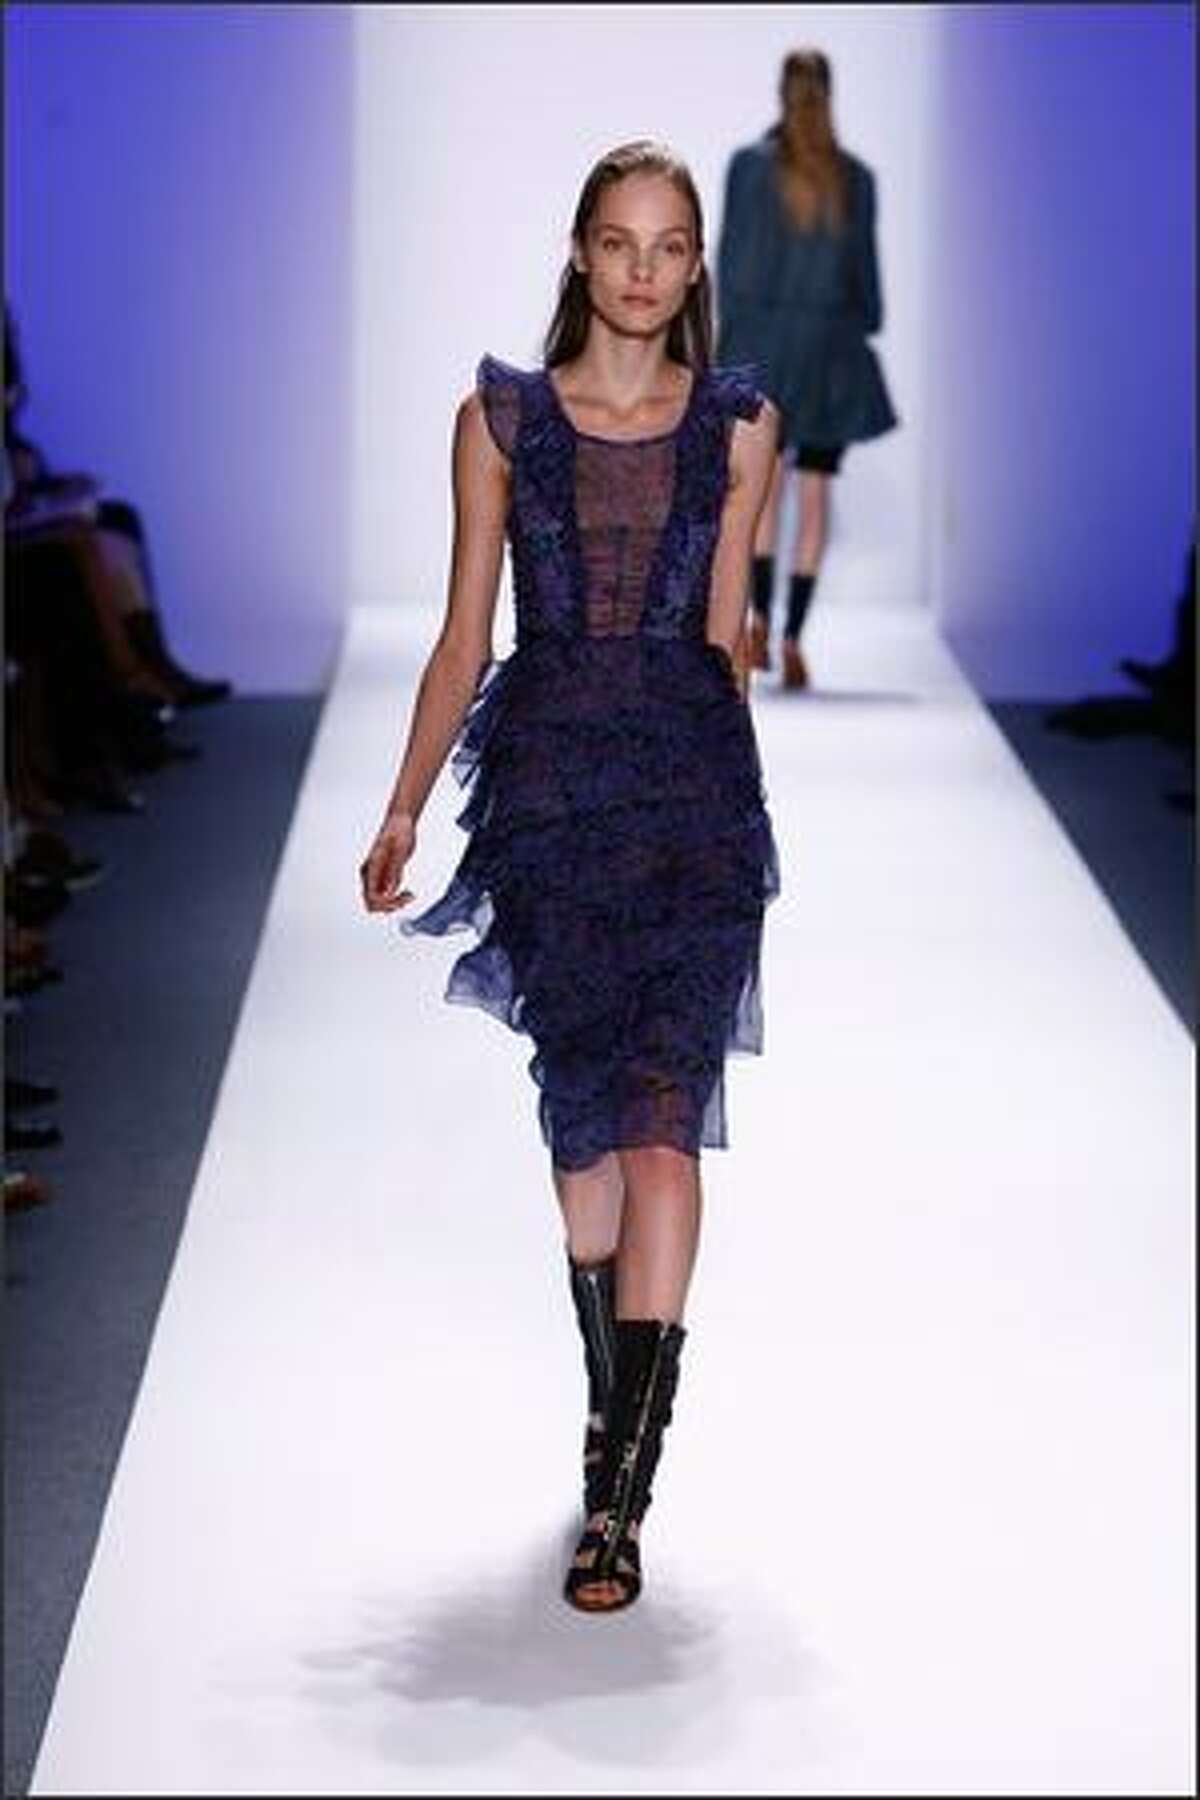 A model walks the runway at the Richard Chai Spring 2009 fashion show during Mercedes-Benz Fashion Week at The Salon in New York City.